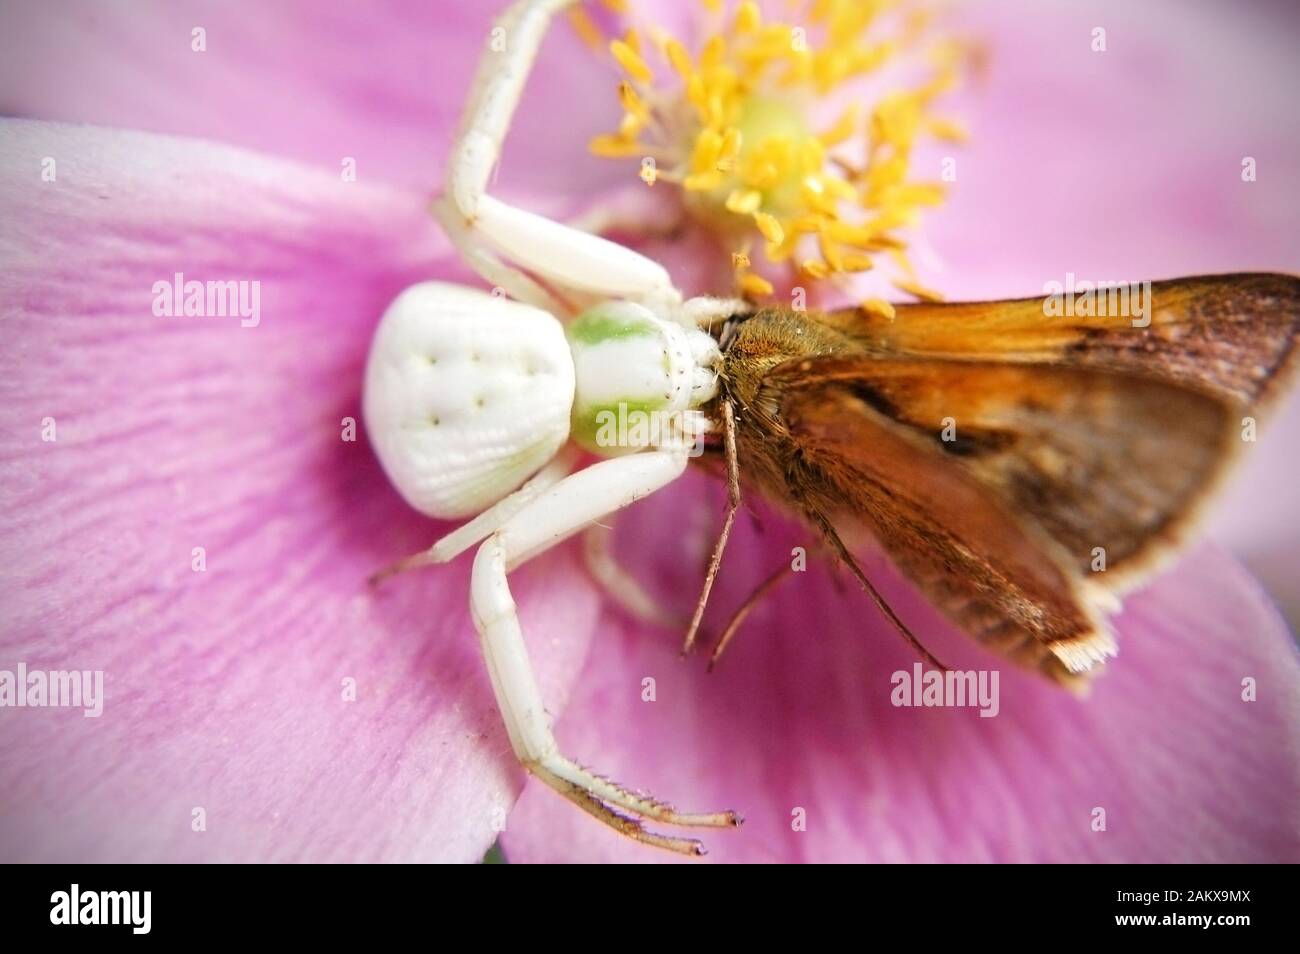 Macro shot of a Whitebanded Crab Spider eating a Monarch butterfly on a Japanese Anemone. Stock Photo